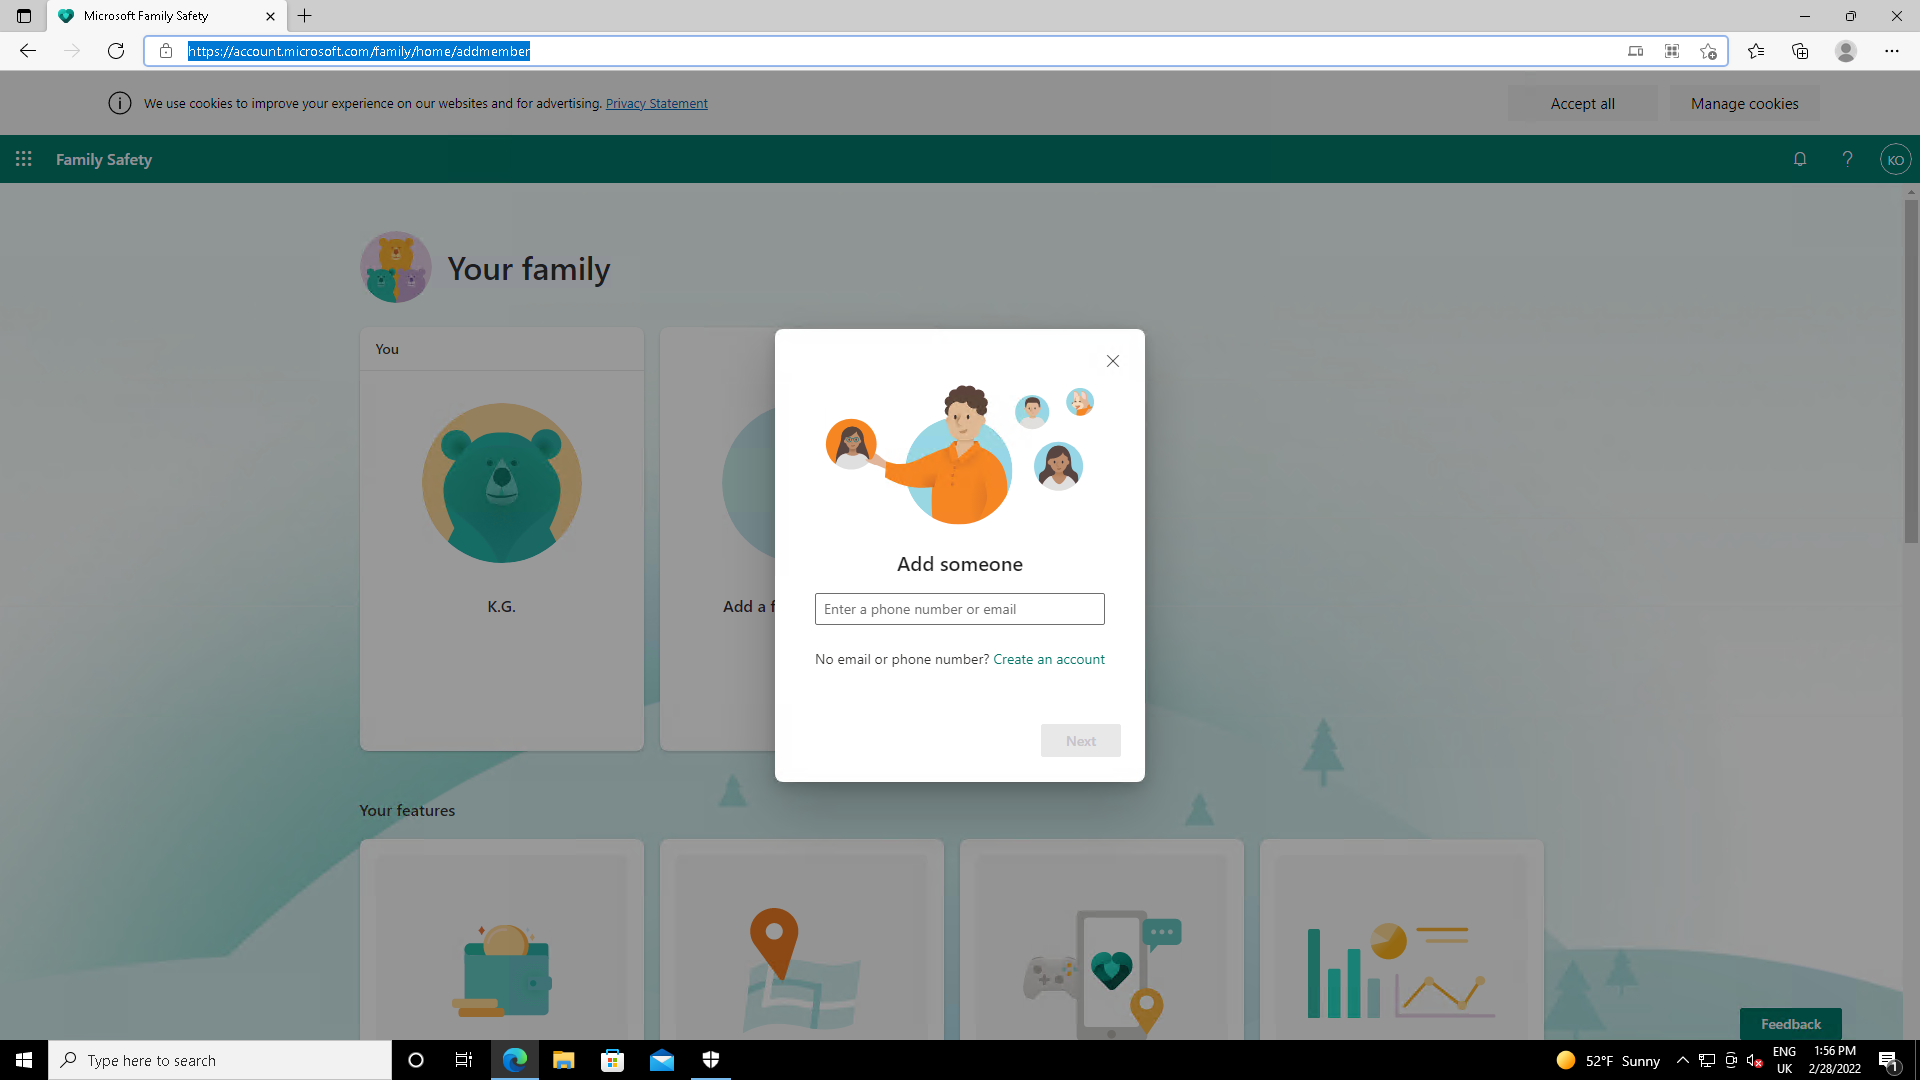 A pop-up invites you to add a user to Family Safety